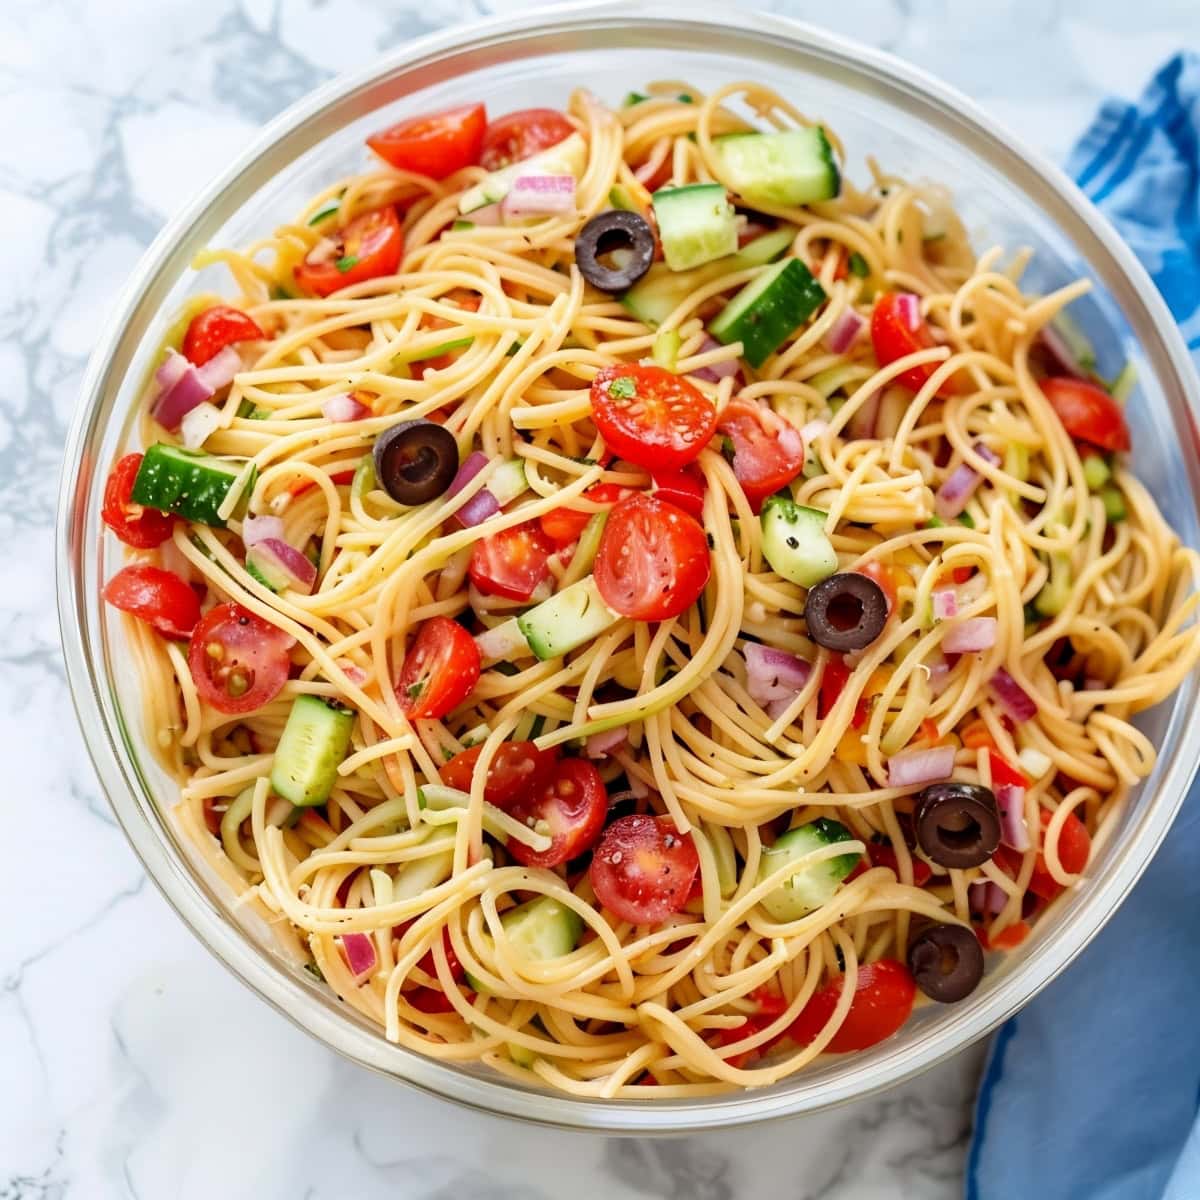 Flavorful homemade California spaghetti salad with red onions, tomatoes and olives.